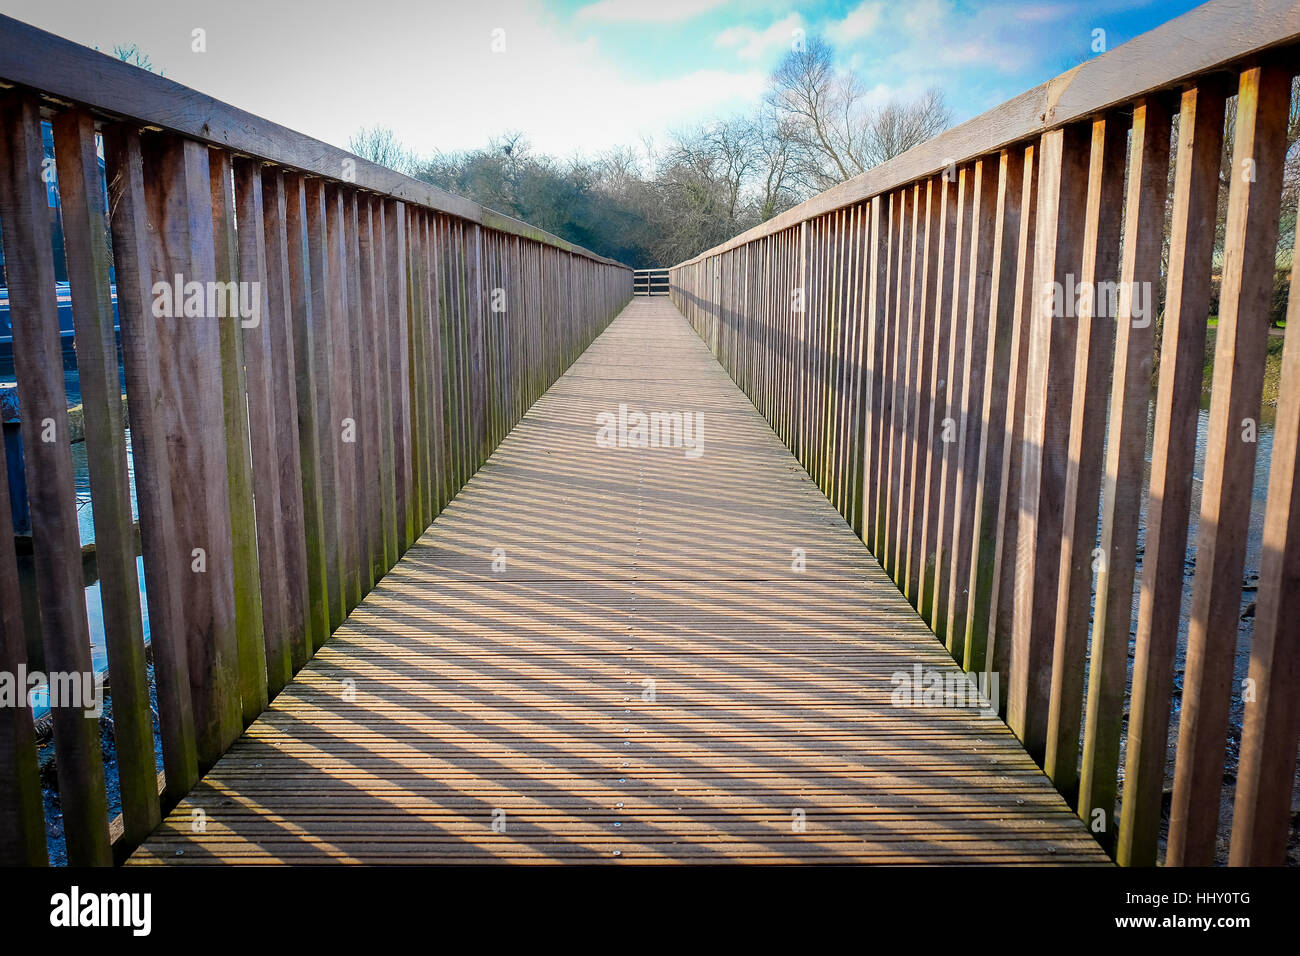 A wooden walkway extends into the distance Stock Photo